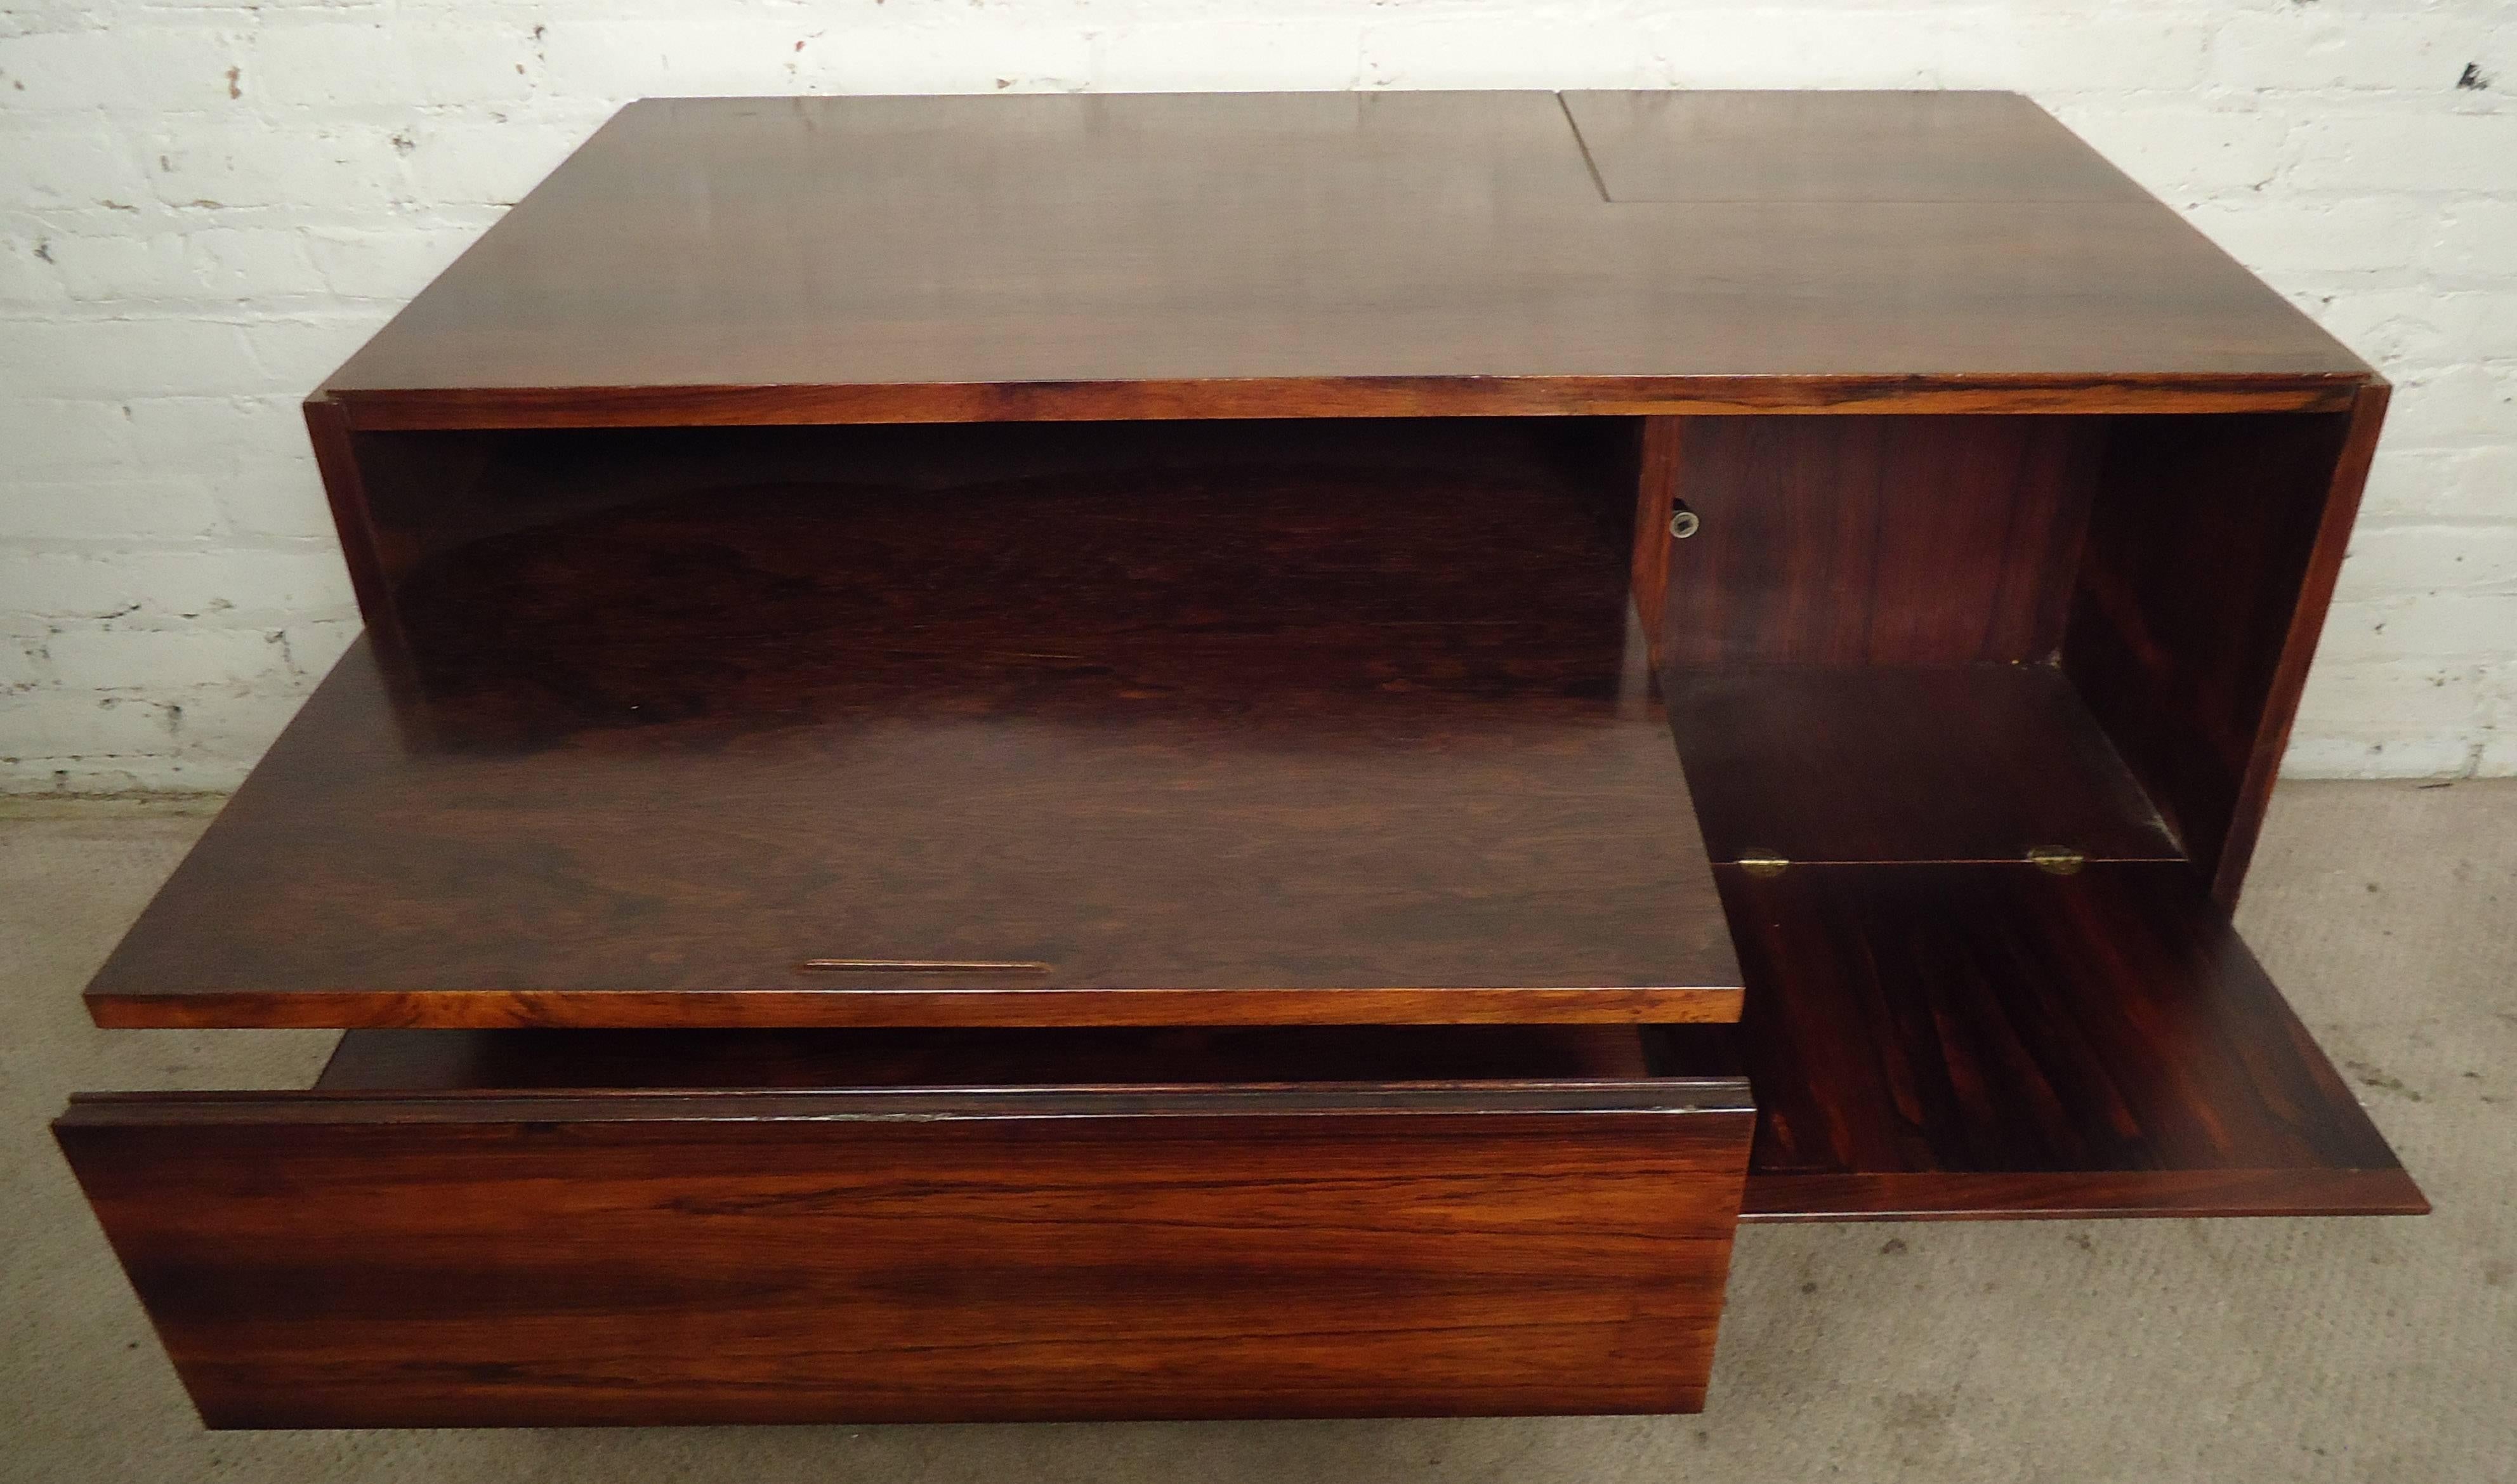 Unique Mid-Century Rosewood Coffee Table w/ Cabinet In Good Condition For Sale In Brooklyn, NY